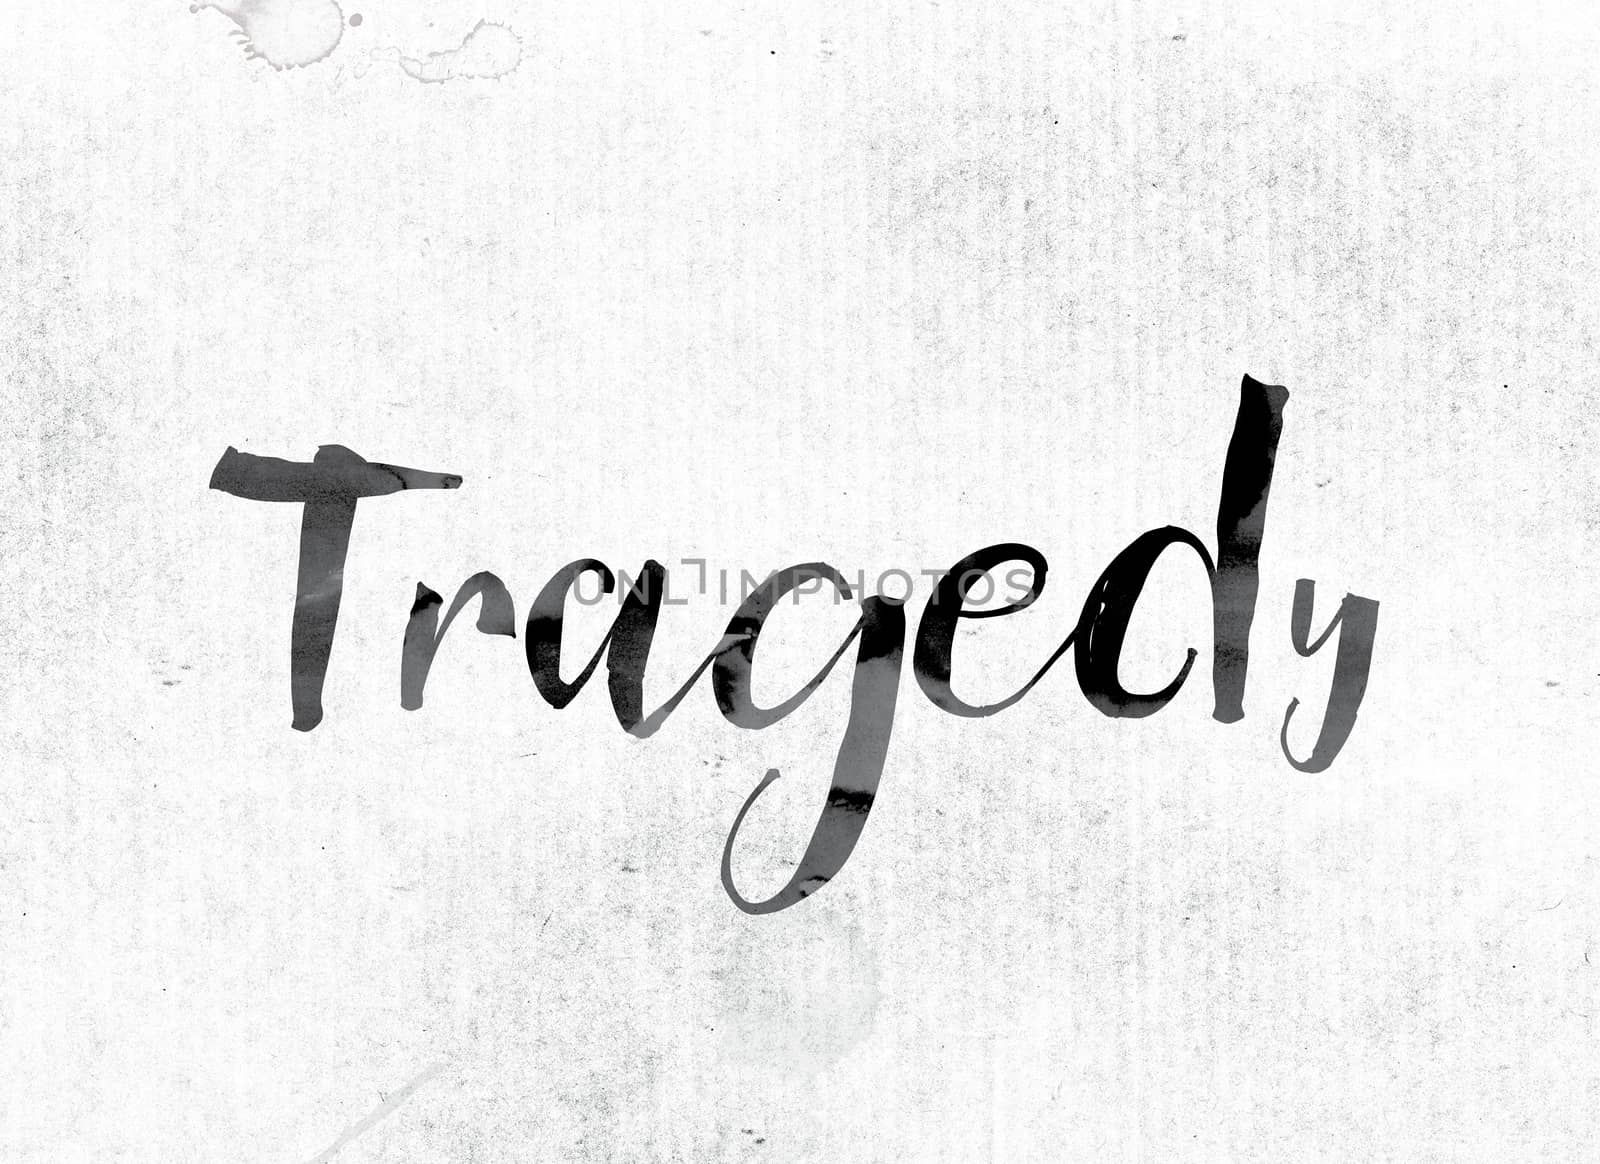 The word "Tragedy" concept and theme painted in watercolor ink on a white paper.